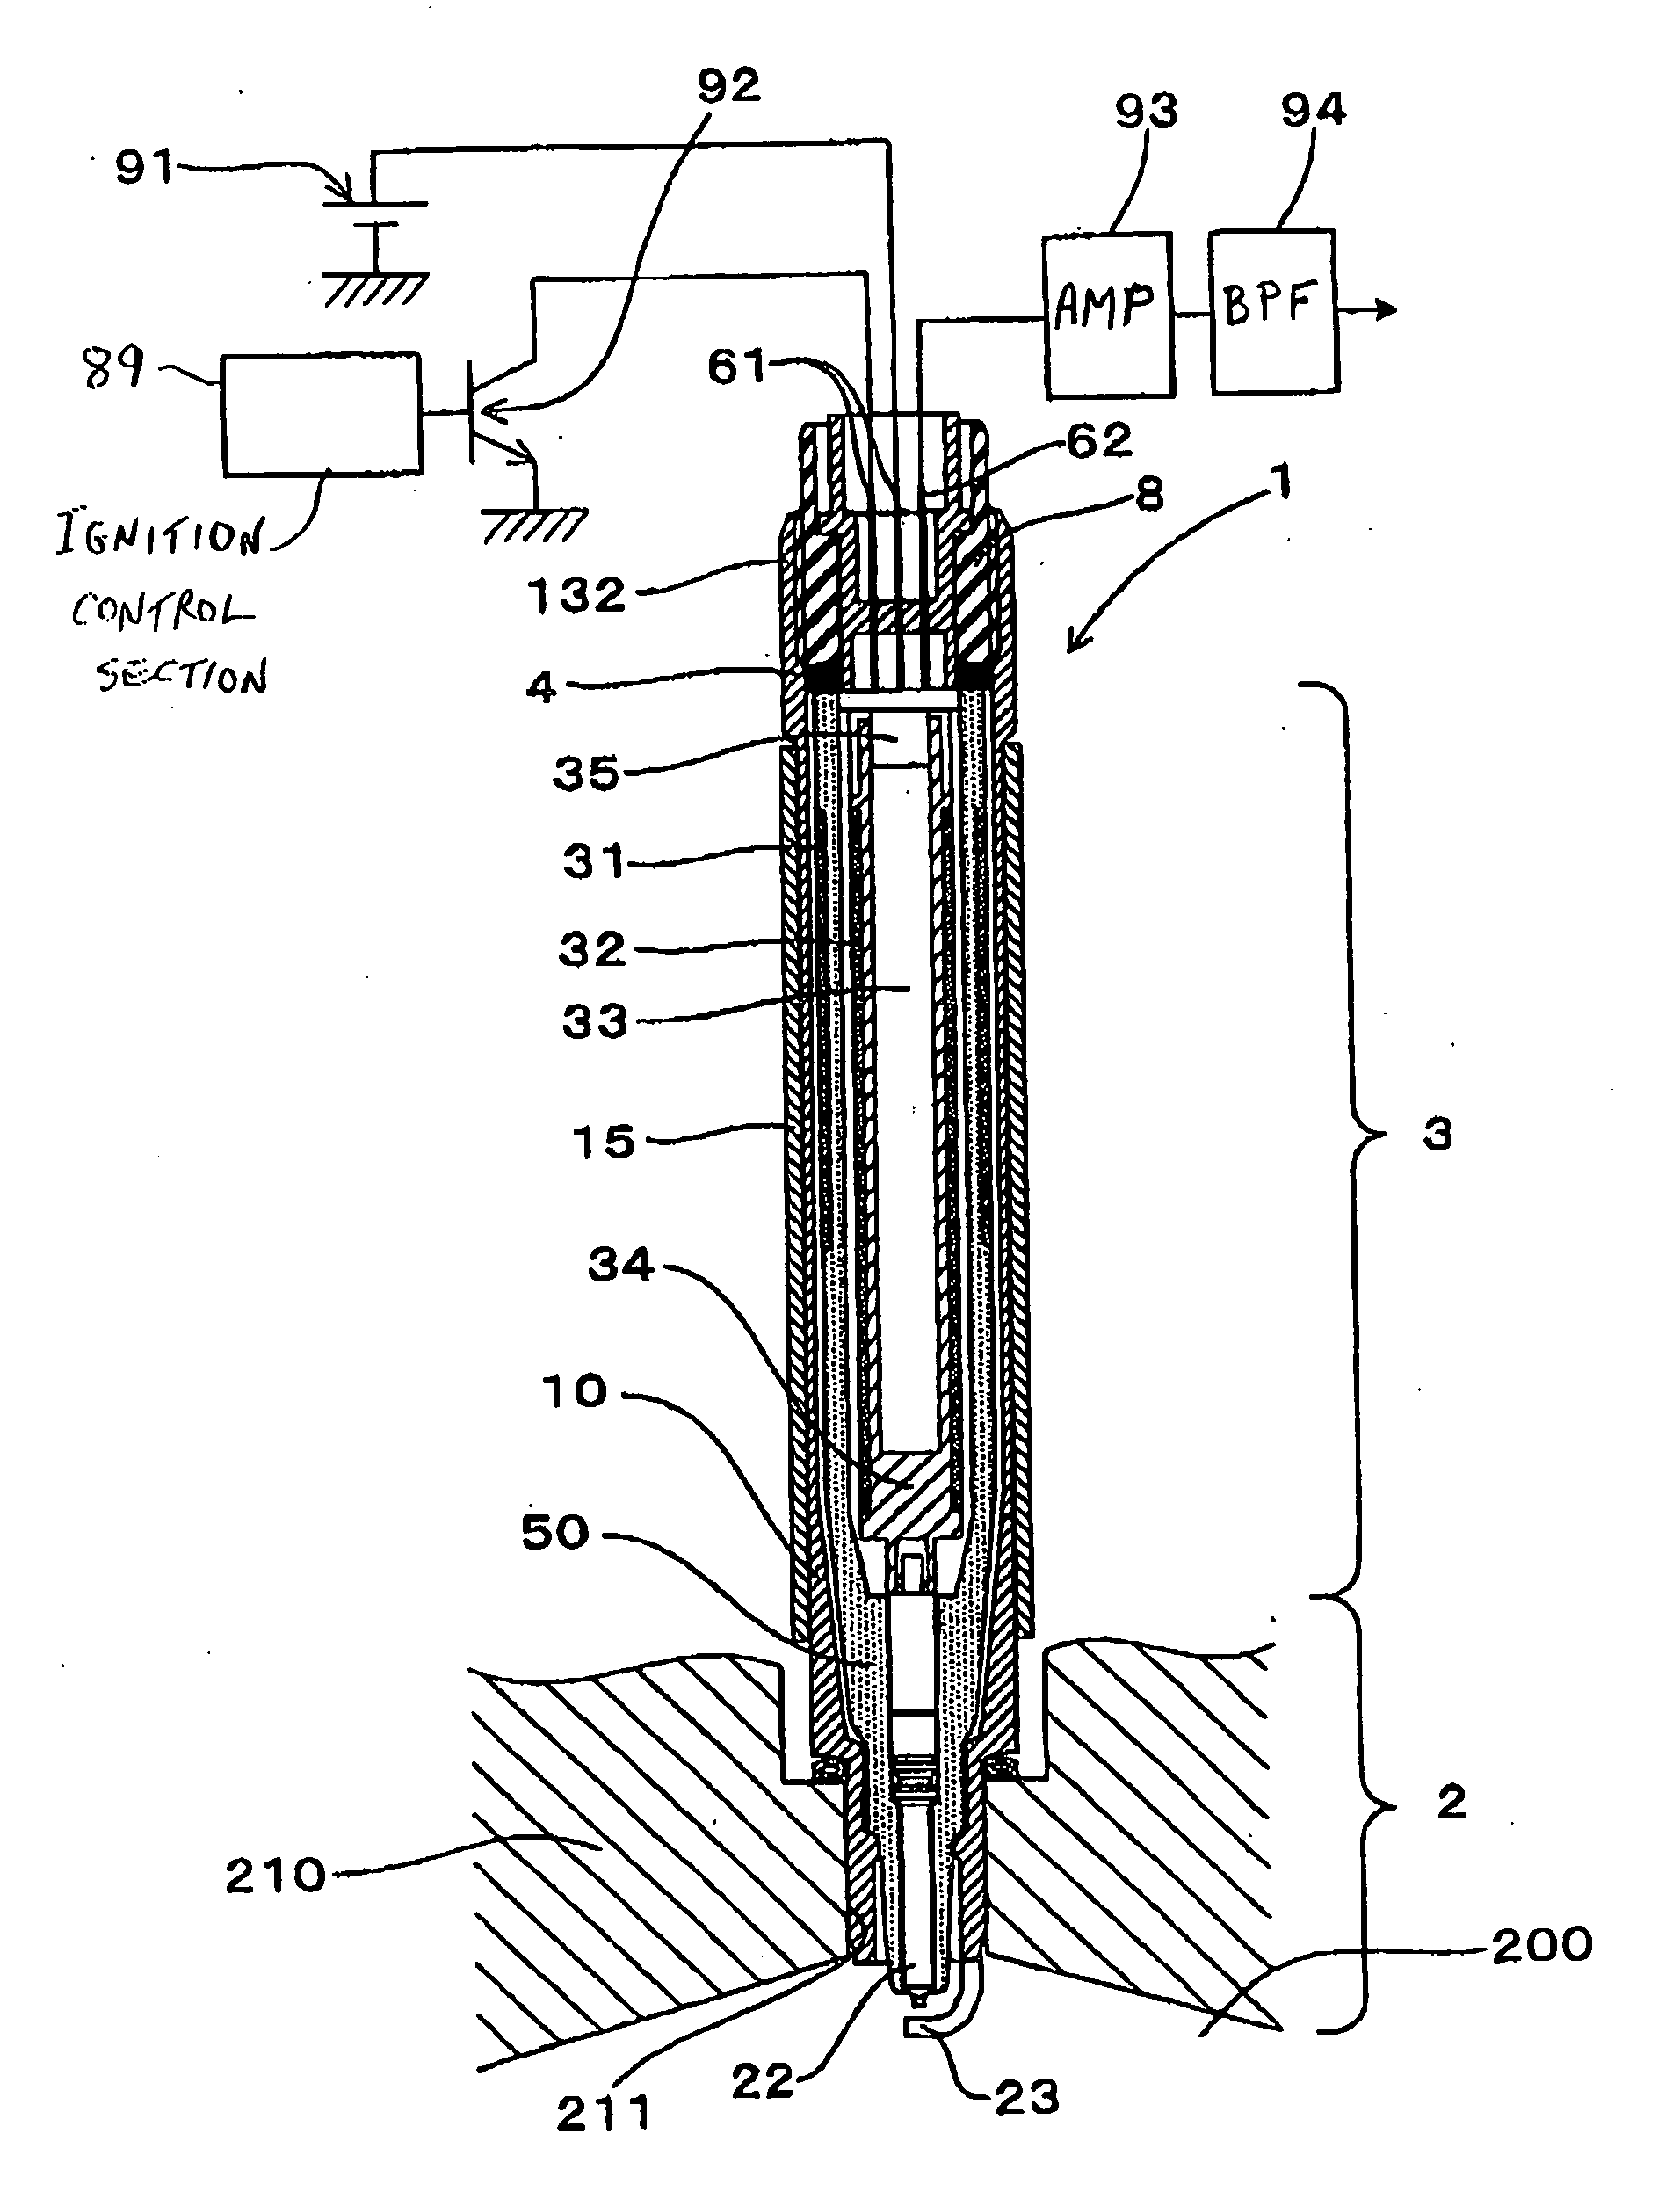 Combustion chamber pressure sensor equipped with damper body for attenuating transmitted engine vibration